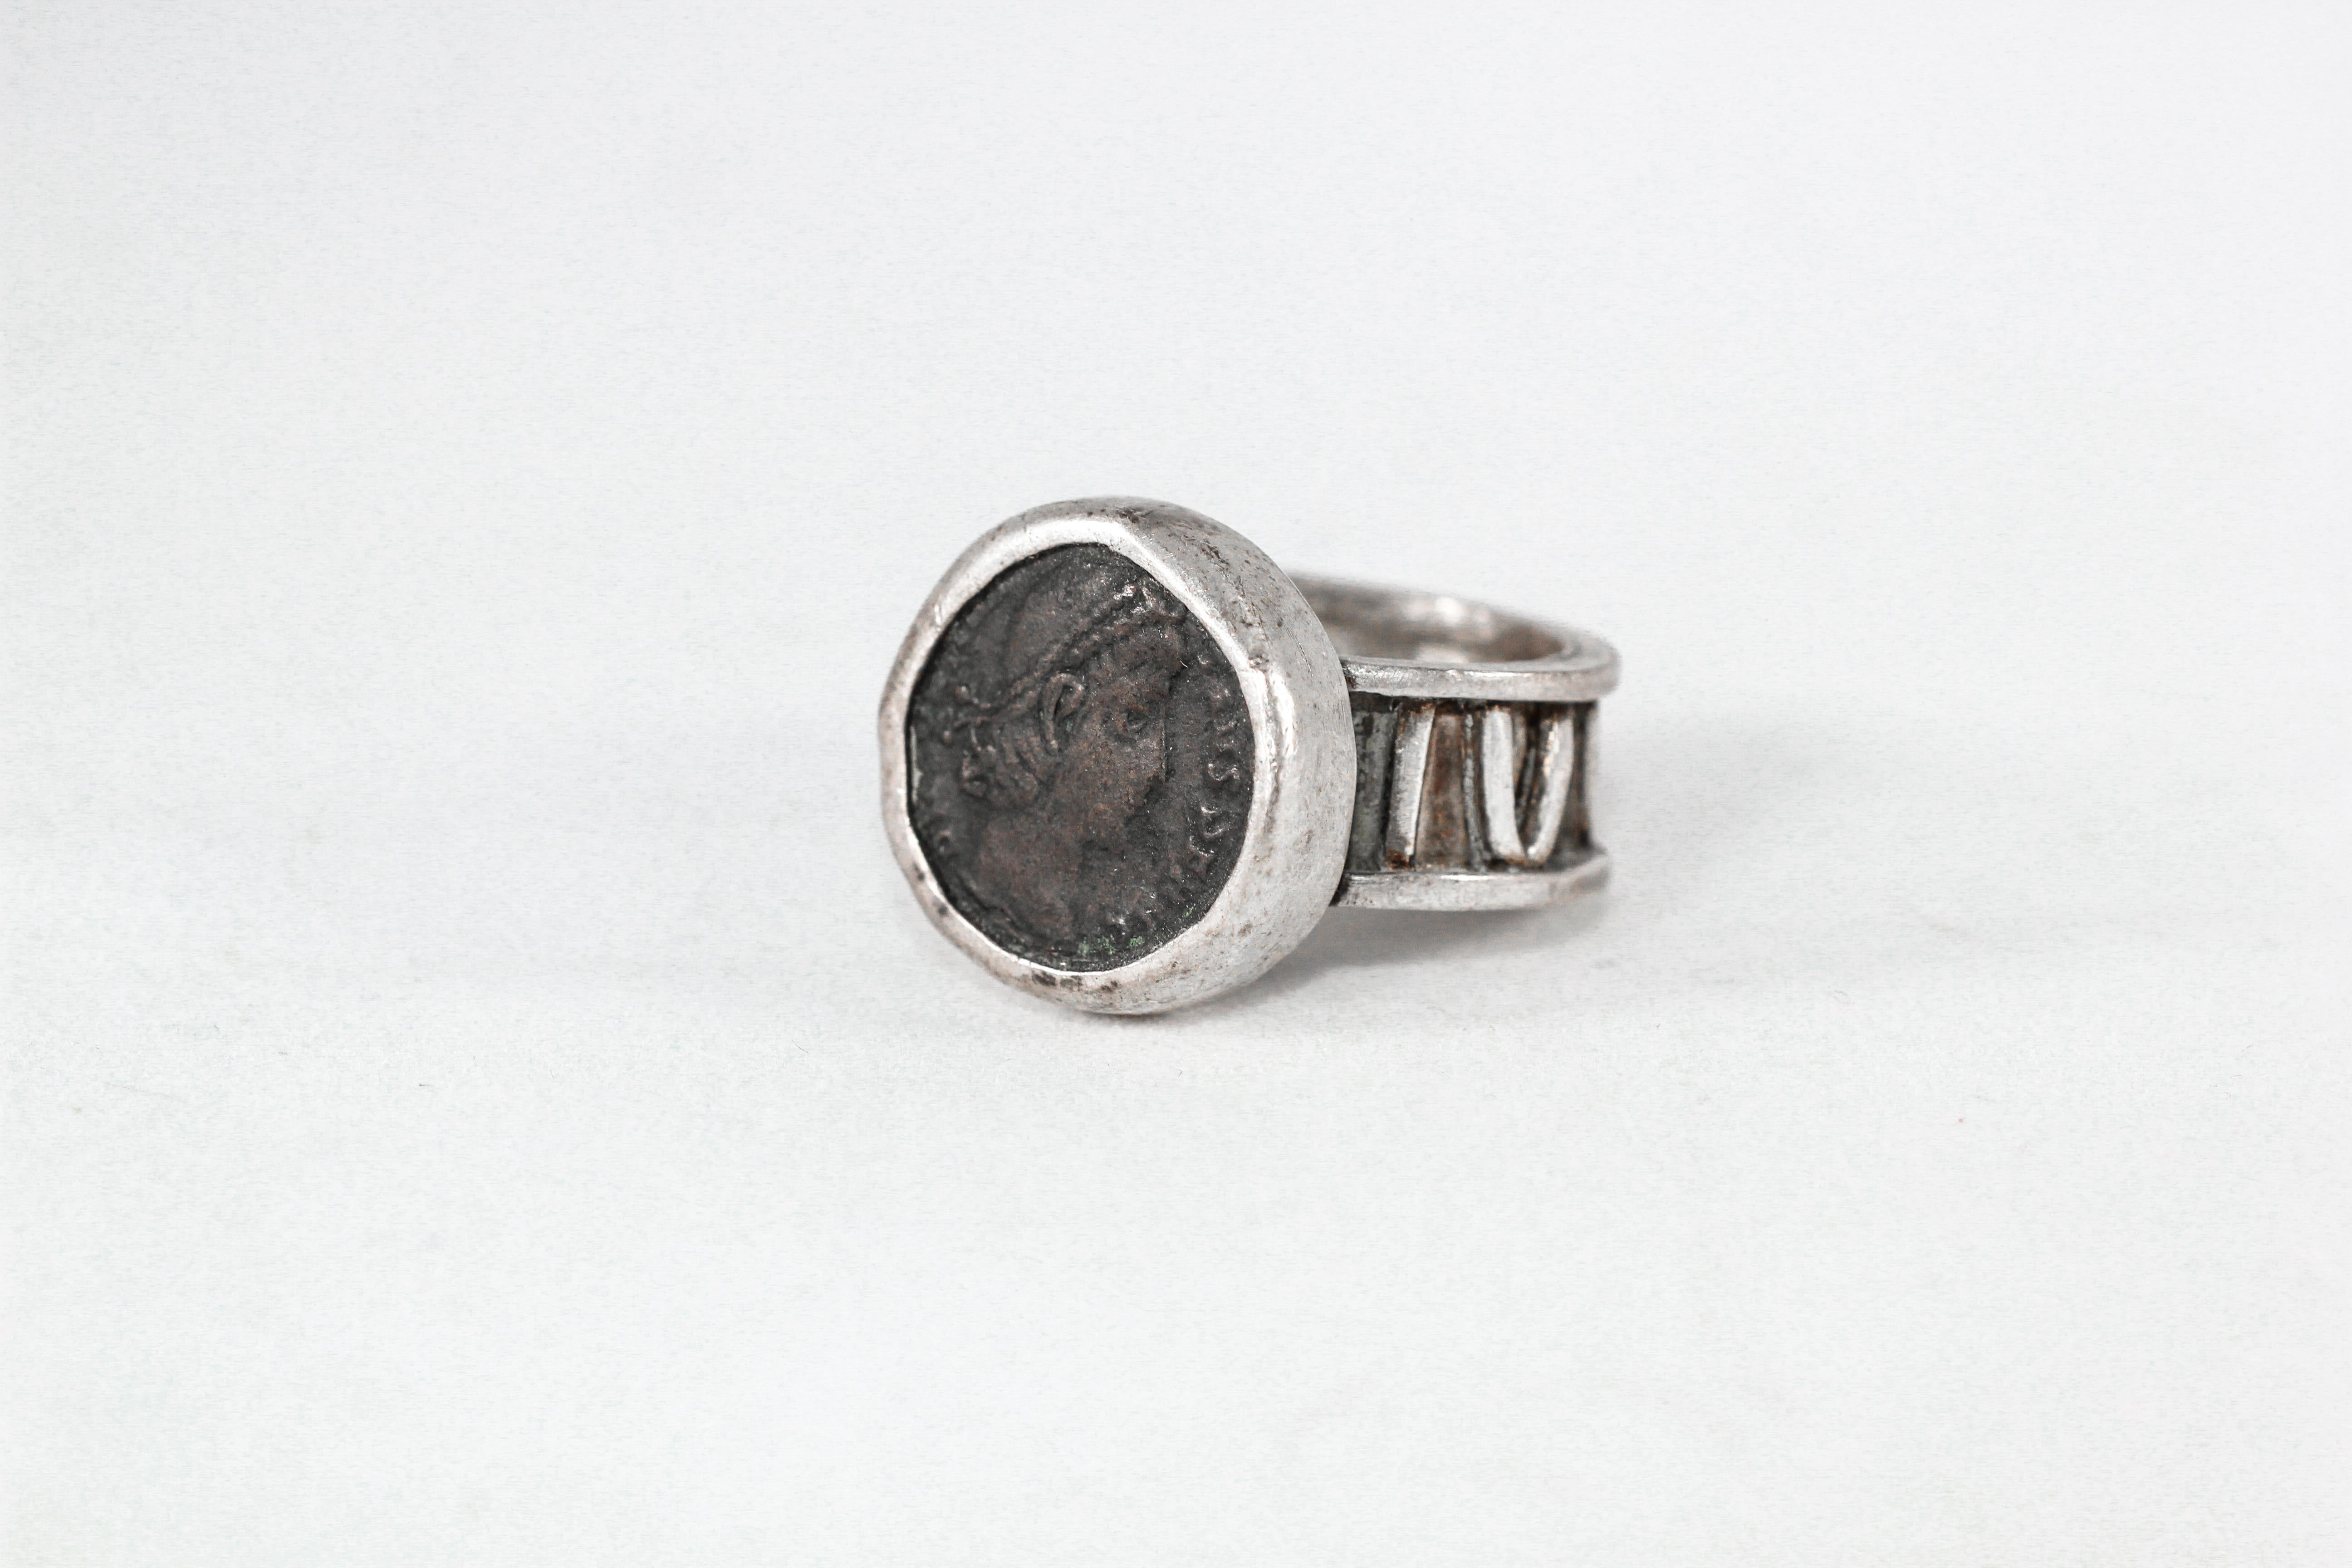 Roman Coin Ring. In this custom designed fine silver signet ring, a bronze Roman Coin is set in a bezel. The shank displays a year in Roman numerals. 

The inspiration for this ring comes from subjectivity and symbolism of Modernist Art. The idea